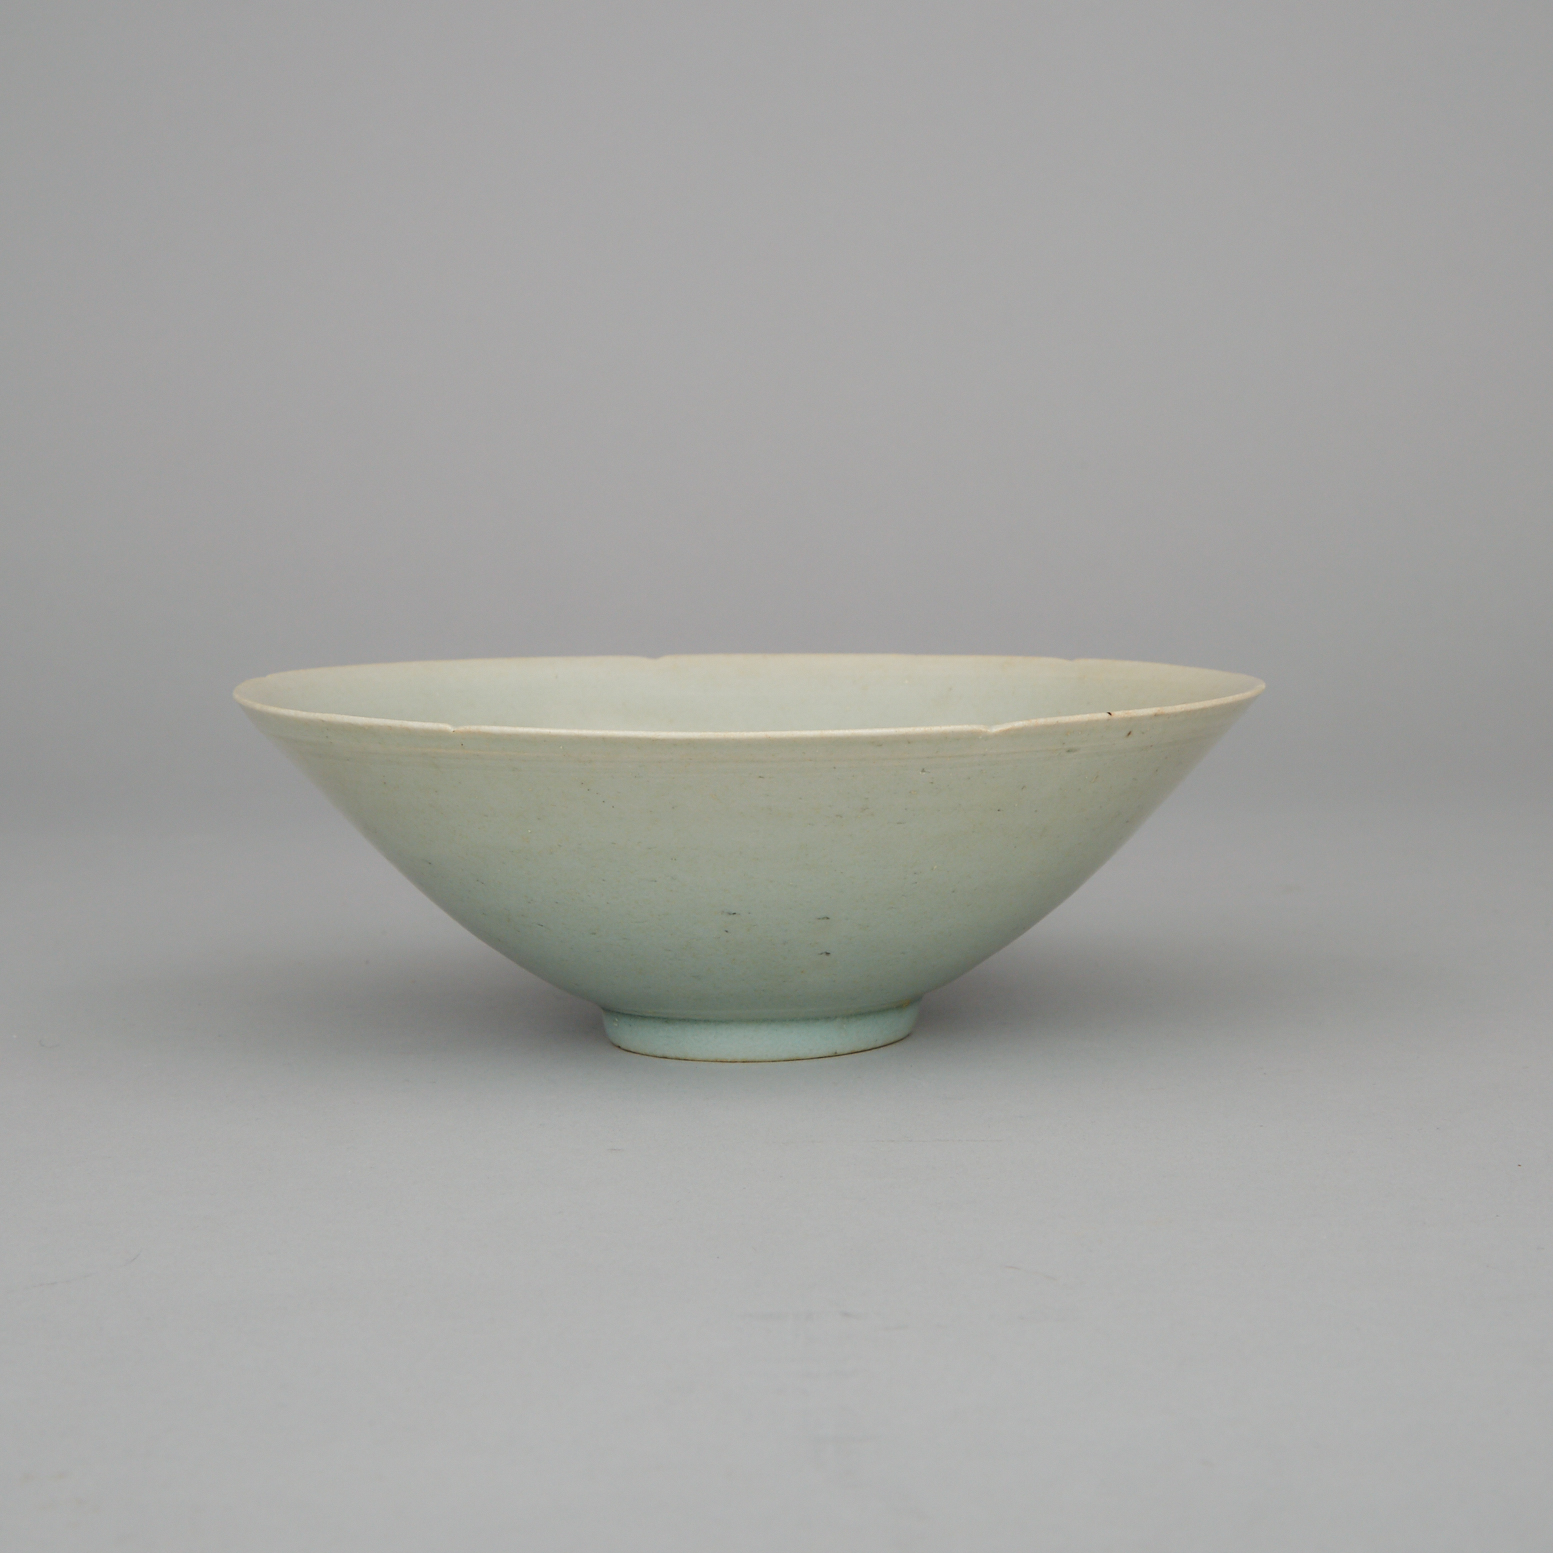 A Yingqing Bowl, Song Dynasty